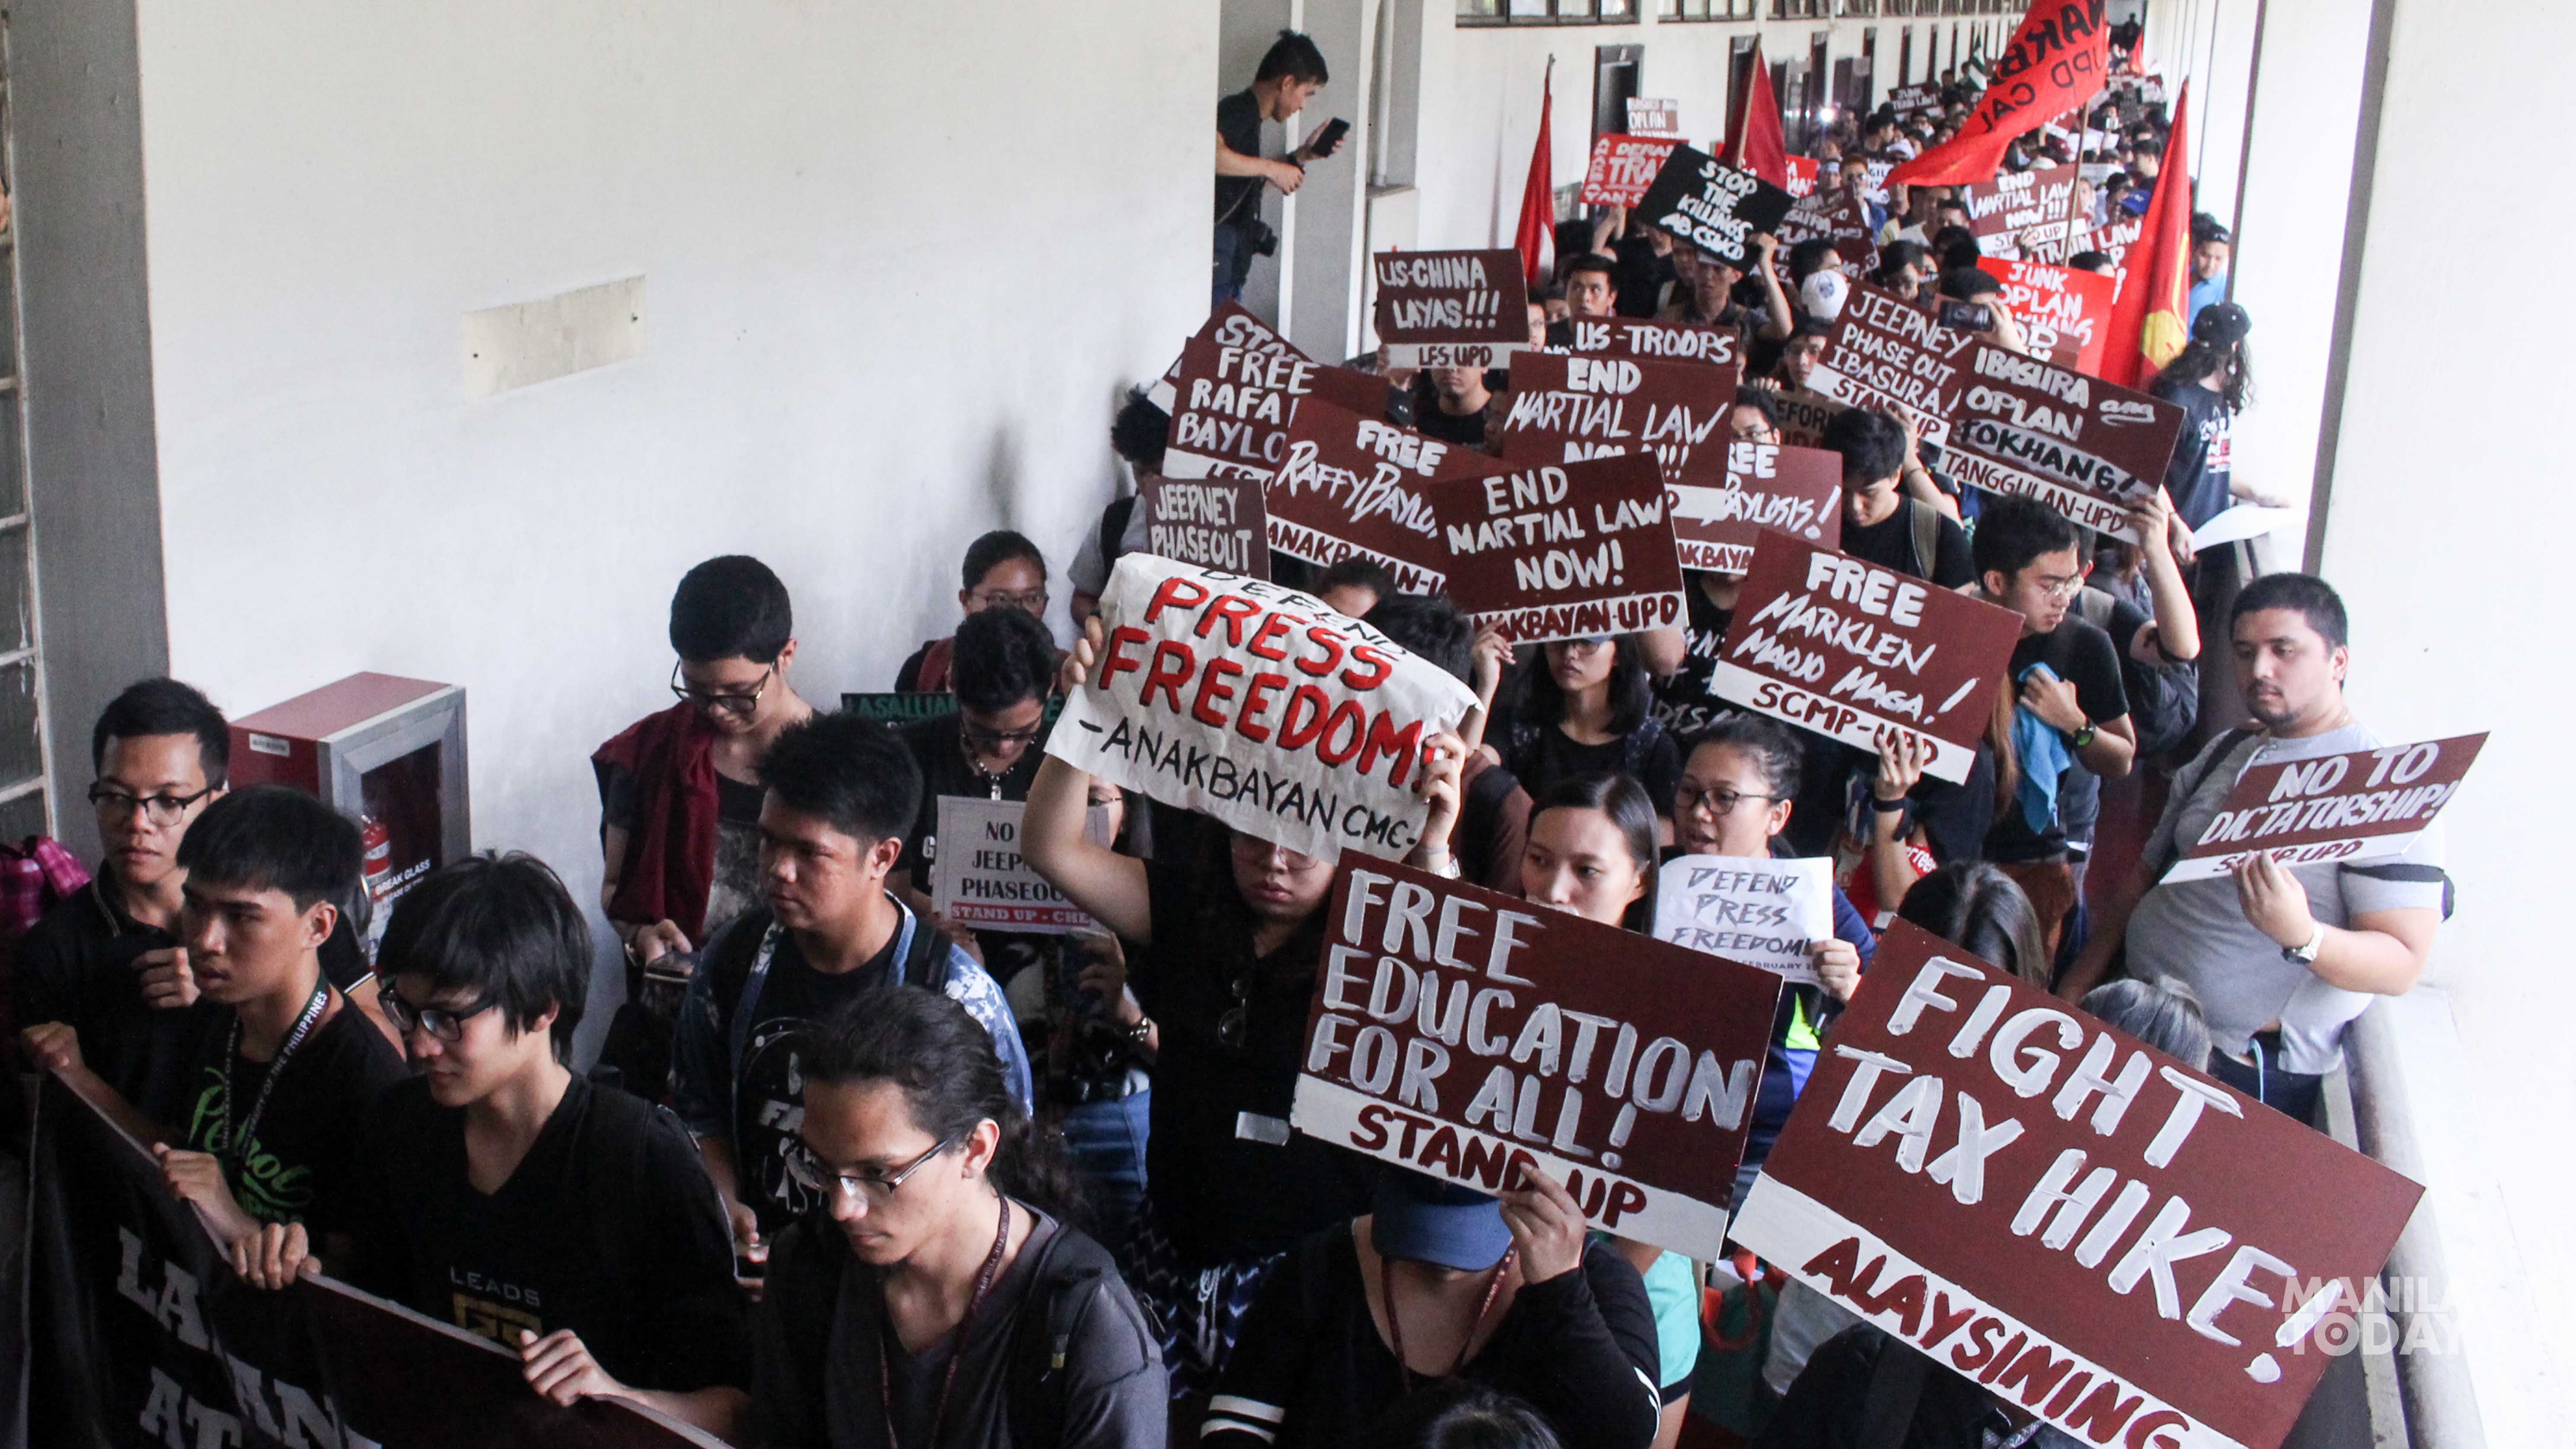 Students held a snake rally at the College of Arts and Social Sciences in UP Diliman before heading to Manila. Photo by Shane David.